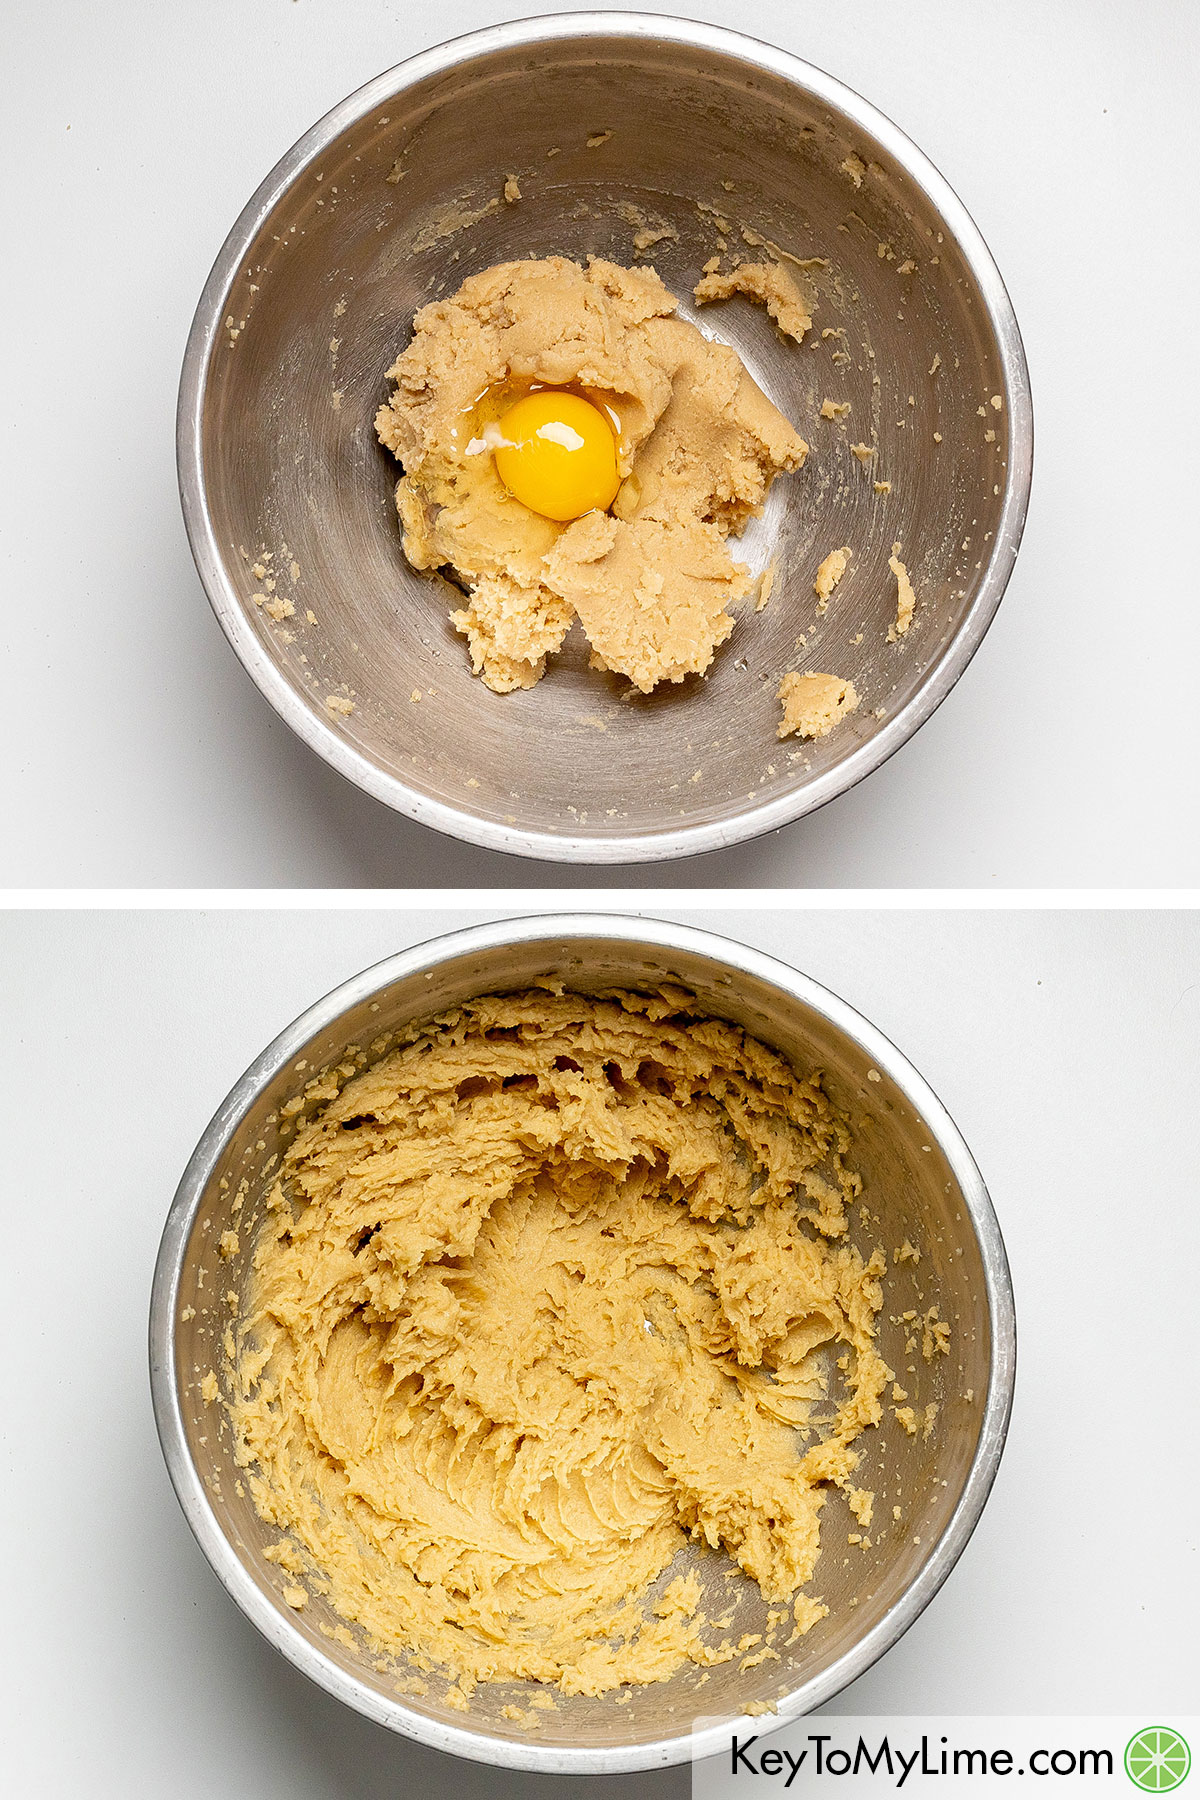 Adding one egg at a time to the cookie batter and mixing until smooth.